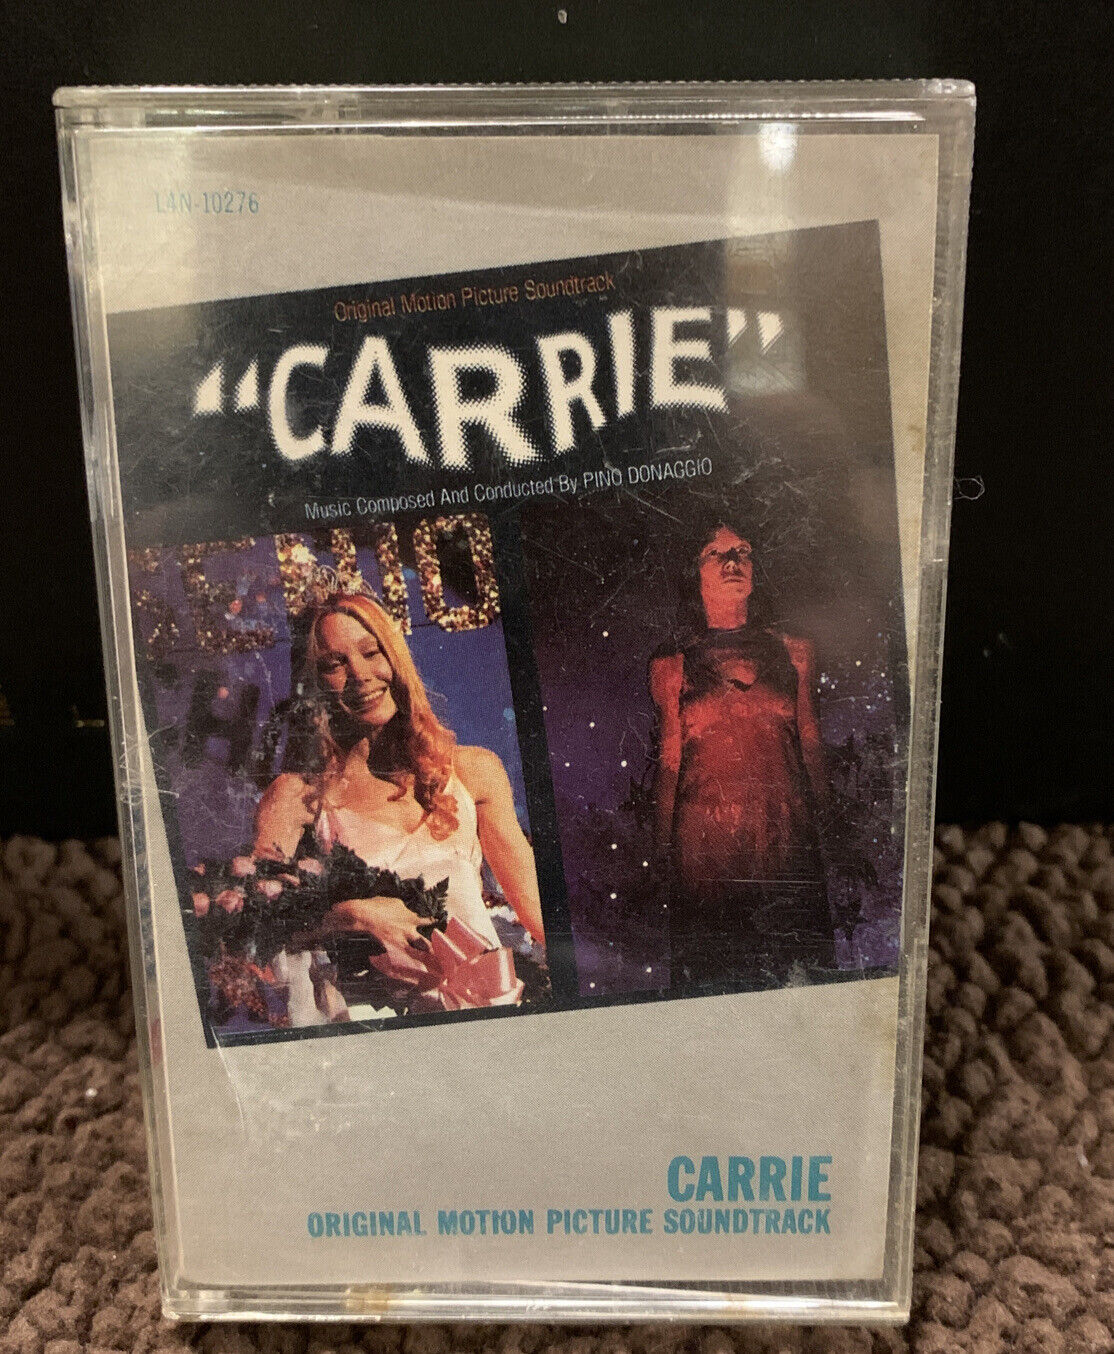 Stephen King CARRIE MOTION PICTURE SOUNDTRACK BY PINO DON CASSETTE TAPE VINTAGE